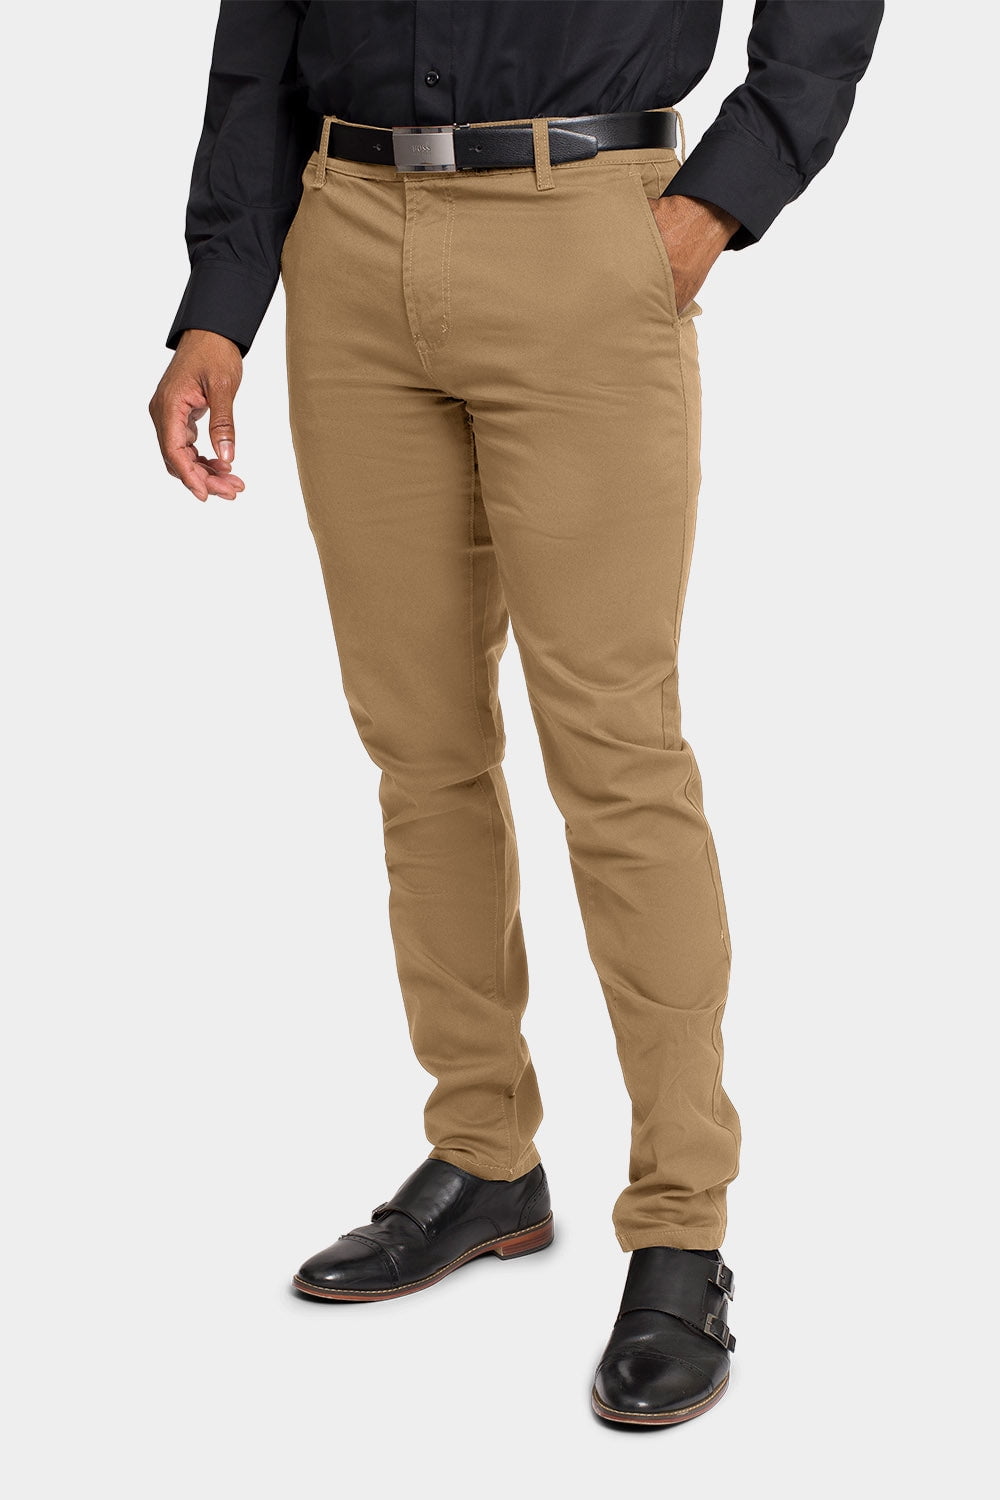 Victorious Men's Basic Casual Slim Fit Stretch Chino Pants DL1250